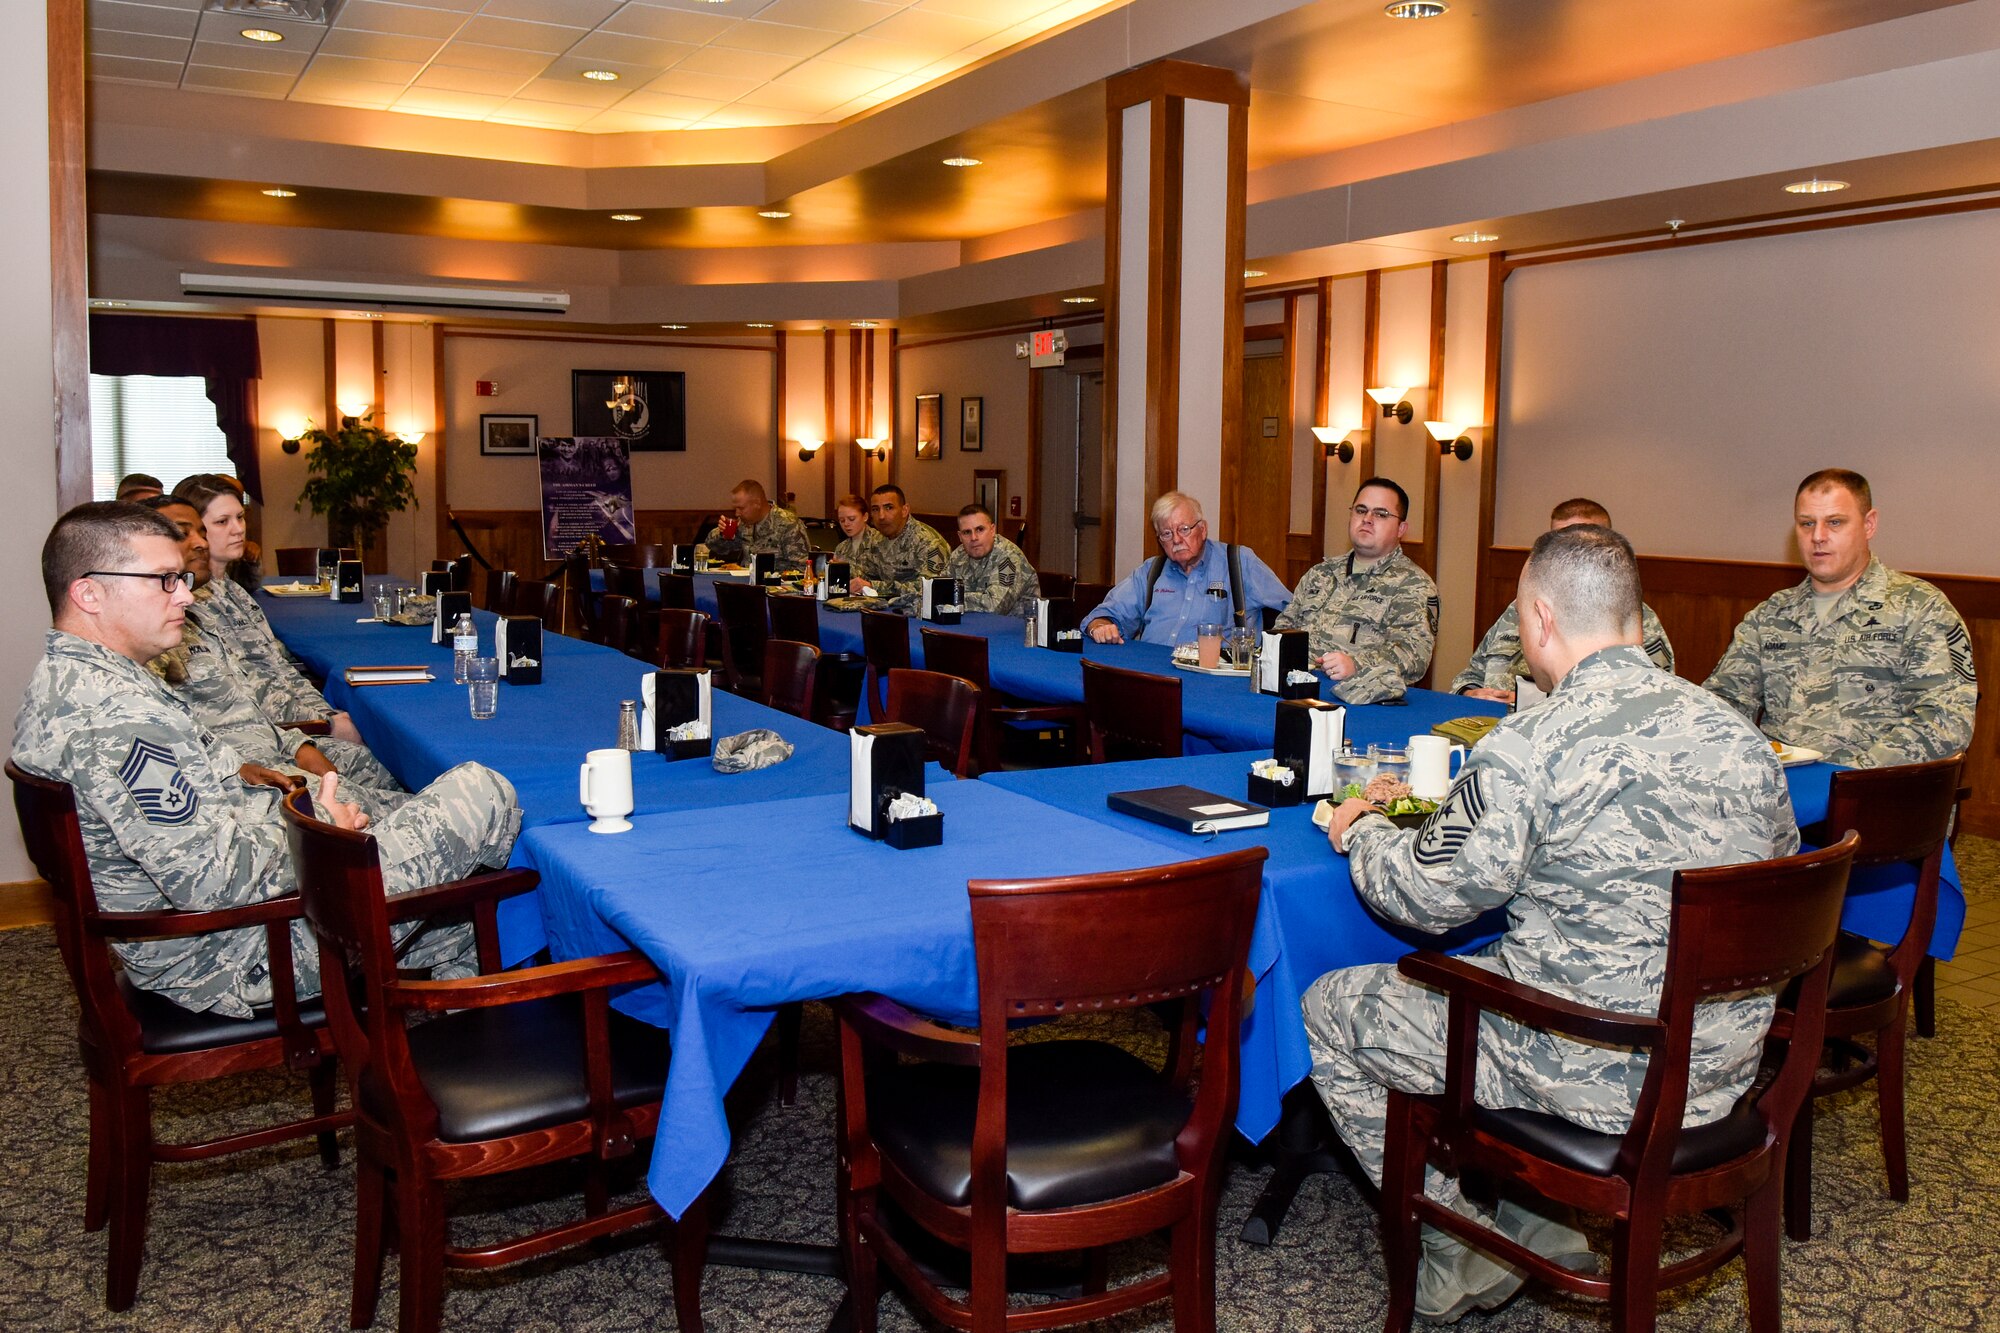 Chief Master Sgt. Matthew Caruso, command senior enlisted leader of U.S. Transportation Command, attends a chiefs luncheon at the dining facility Feb. 15, 2018, at Seymour Johnson Air Force Base, North Carolina.